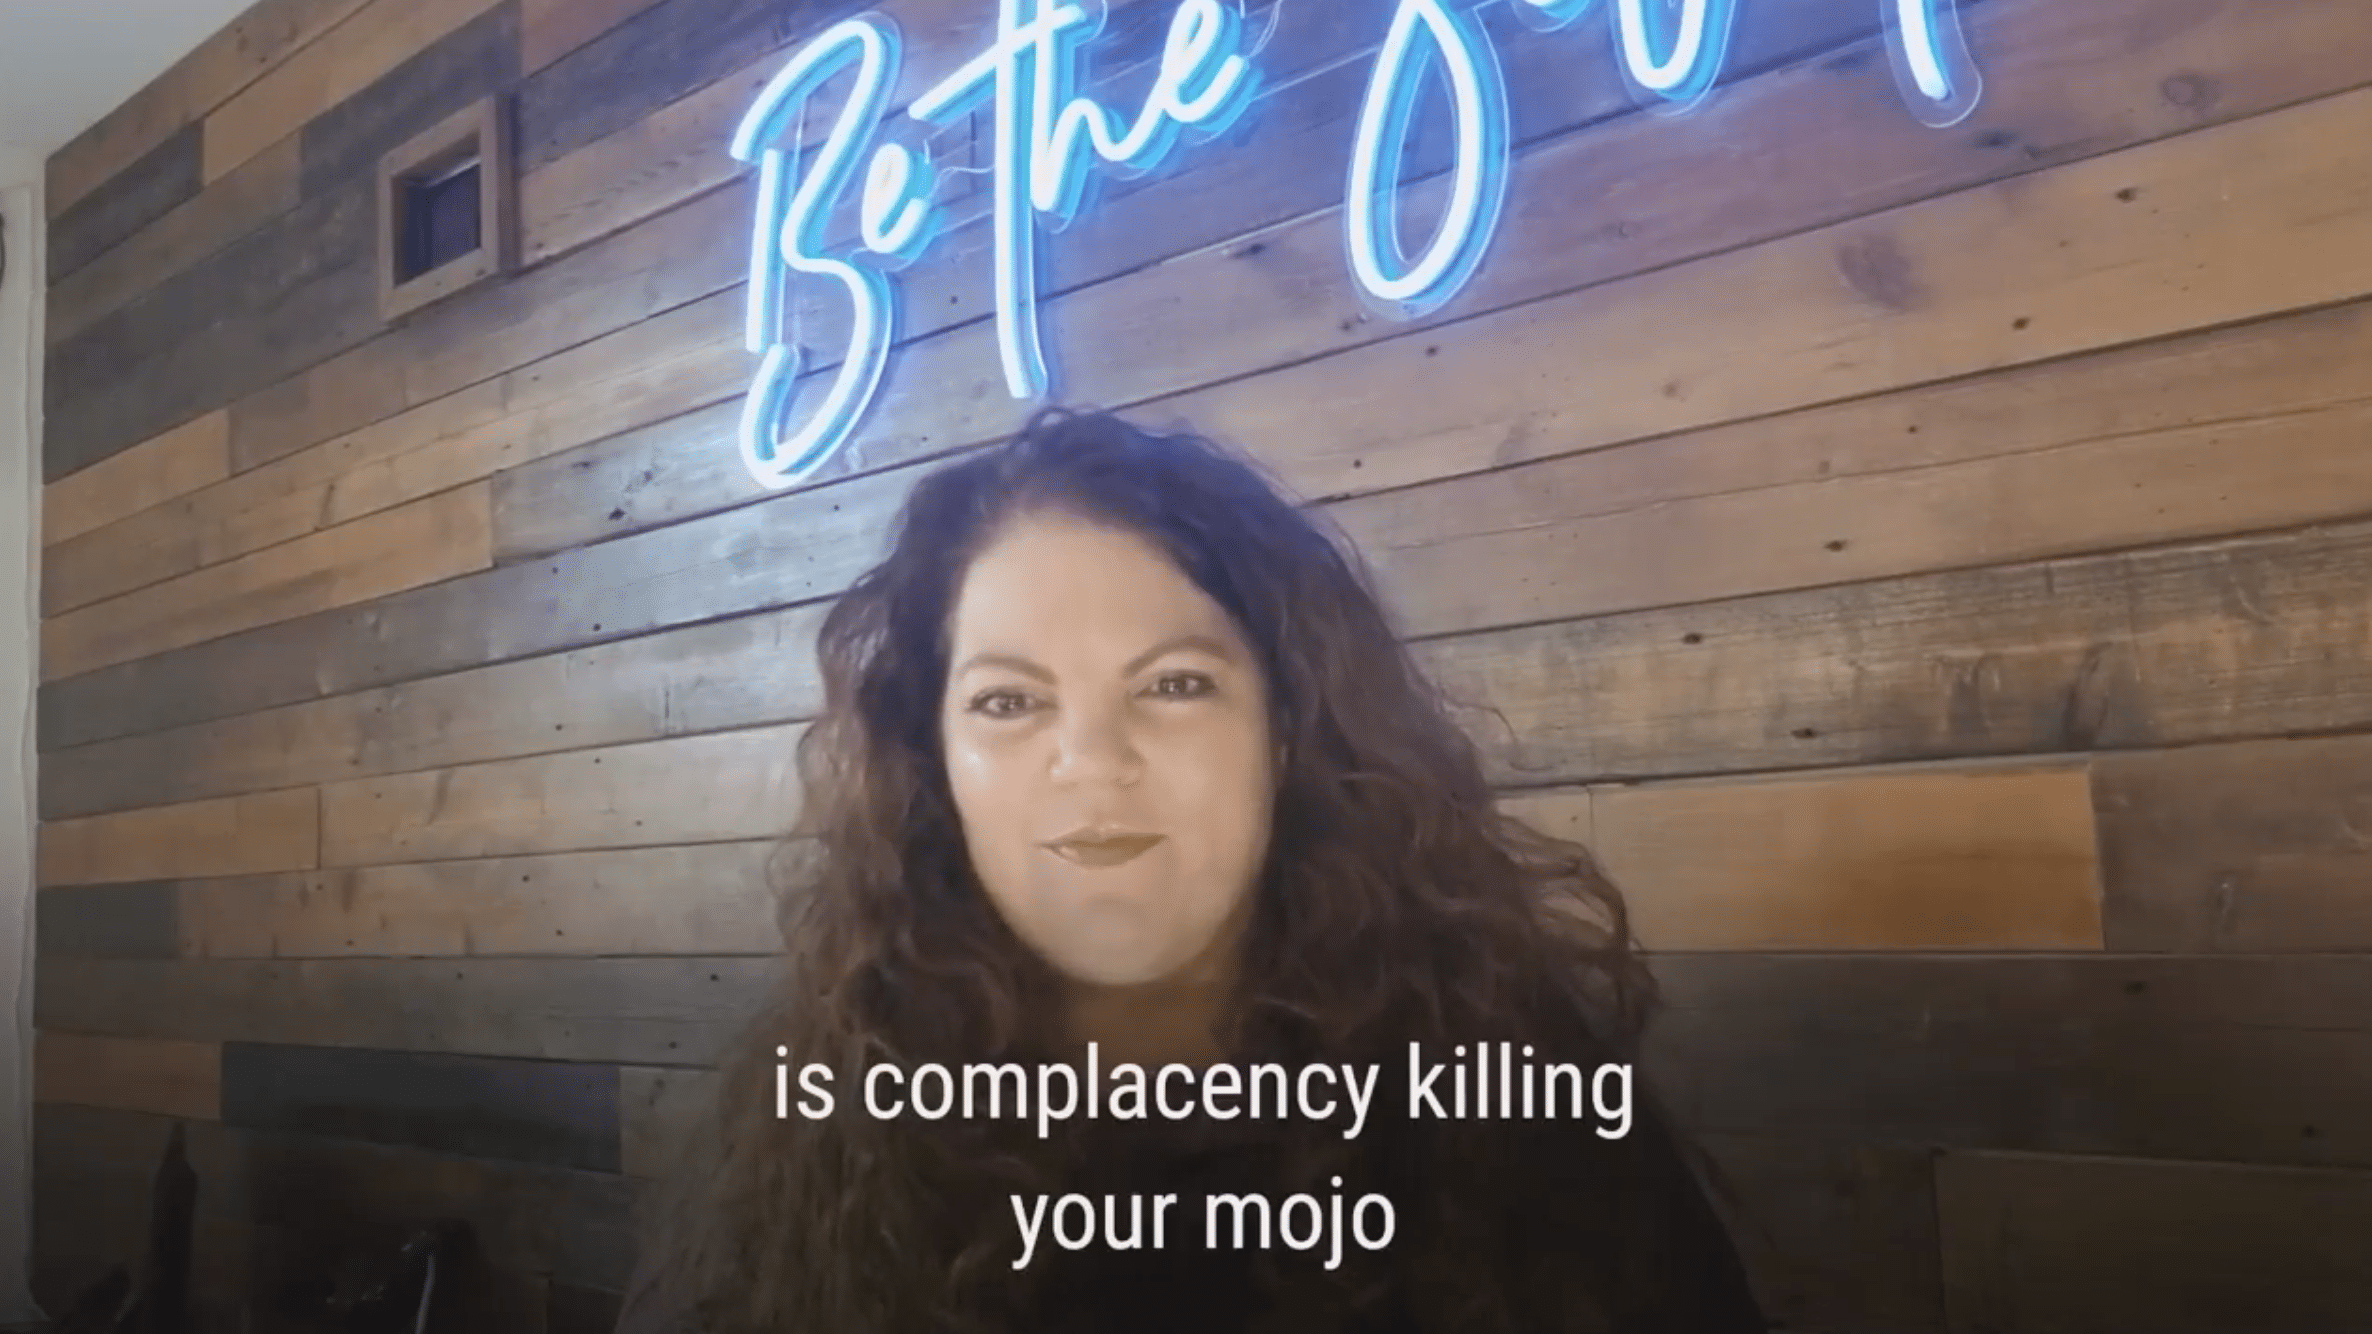 Is Complacency Killing Your MOJO?